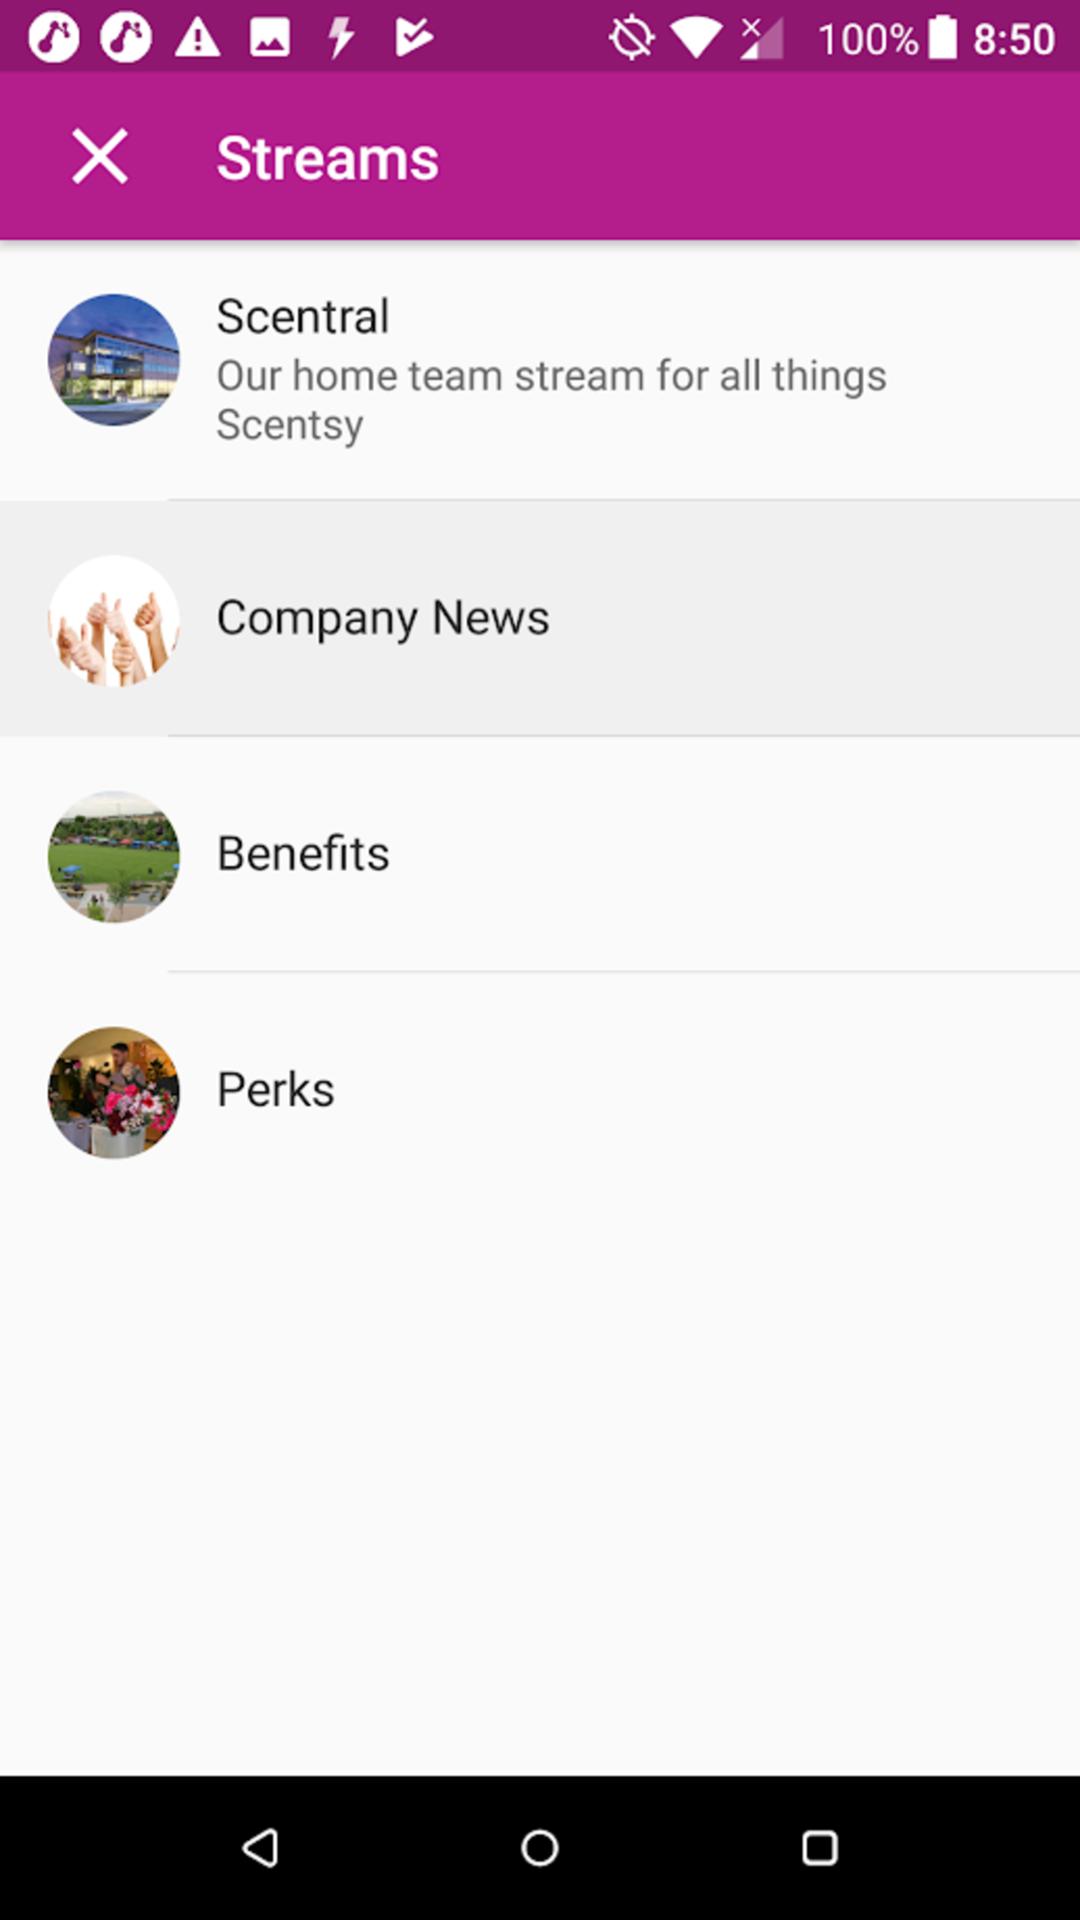 Scentral by Scentsy Inc 6.21.0b188 Screenshot 2